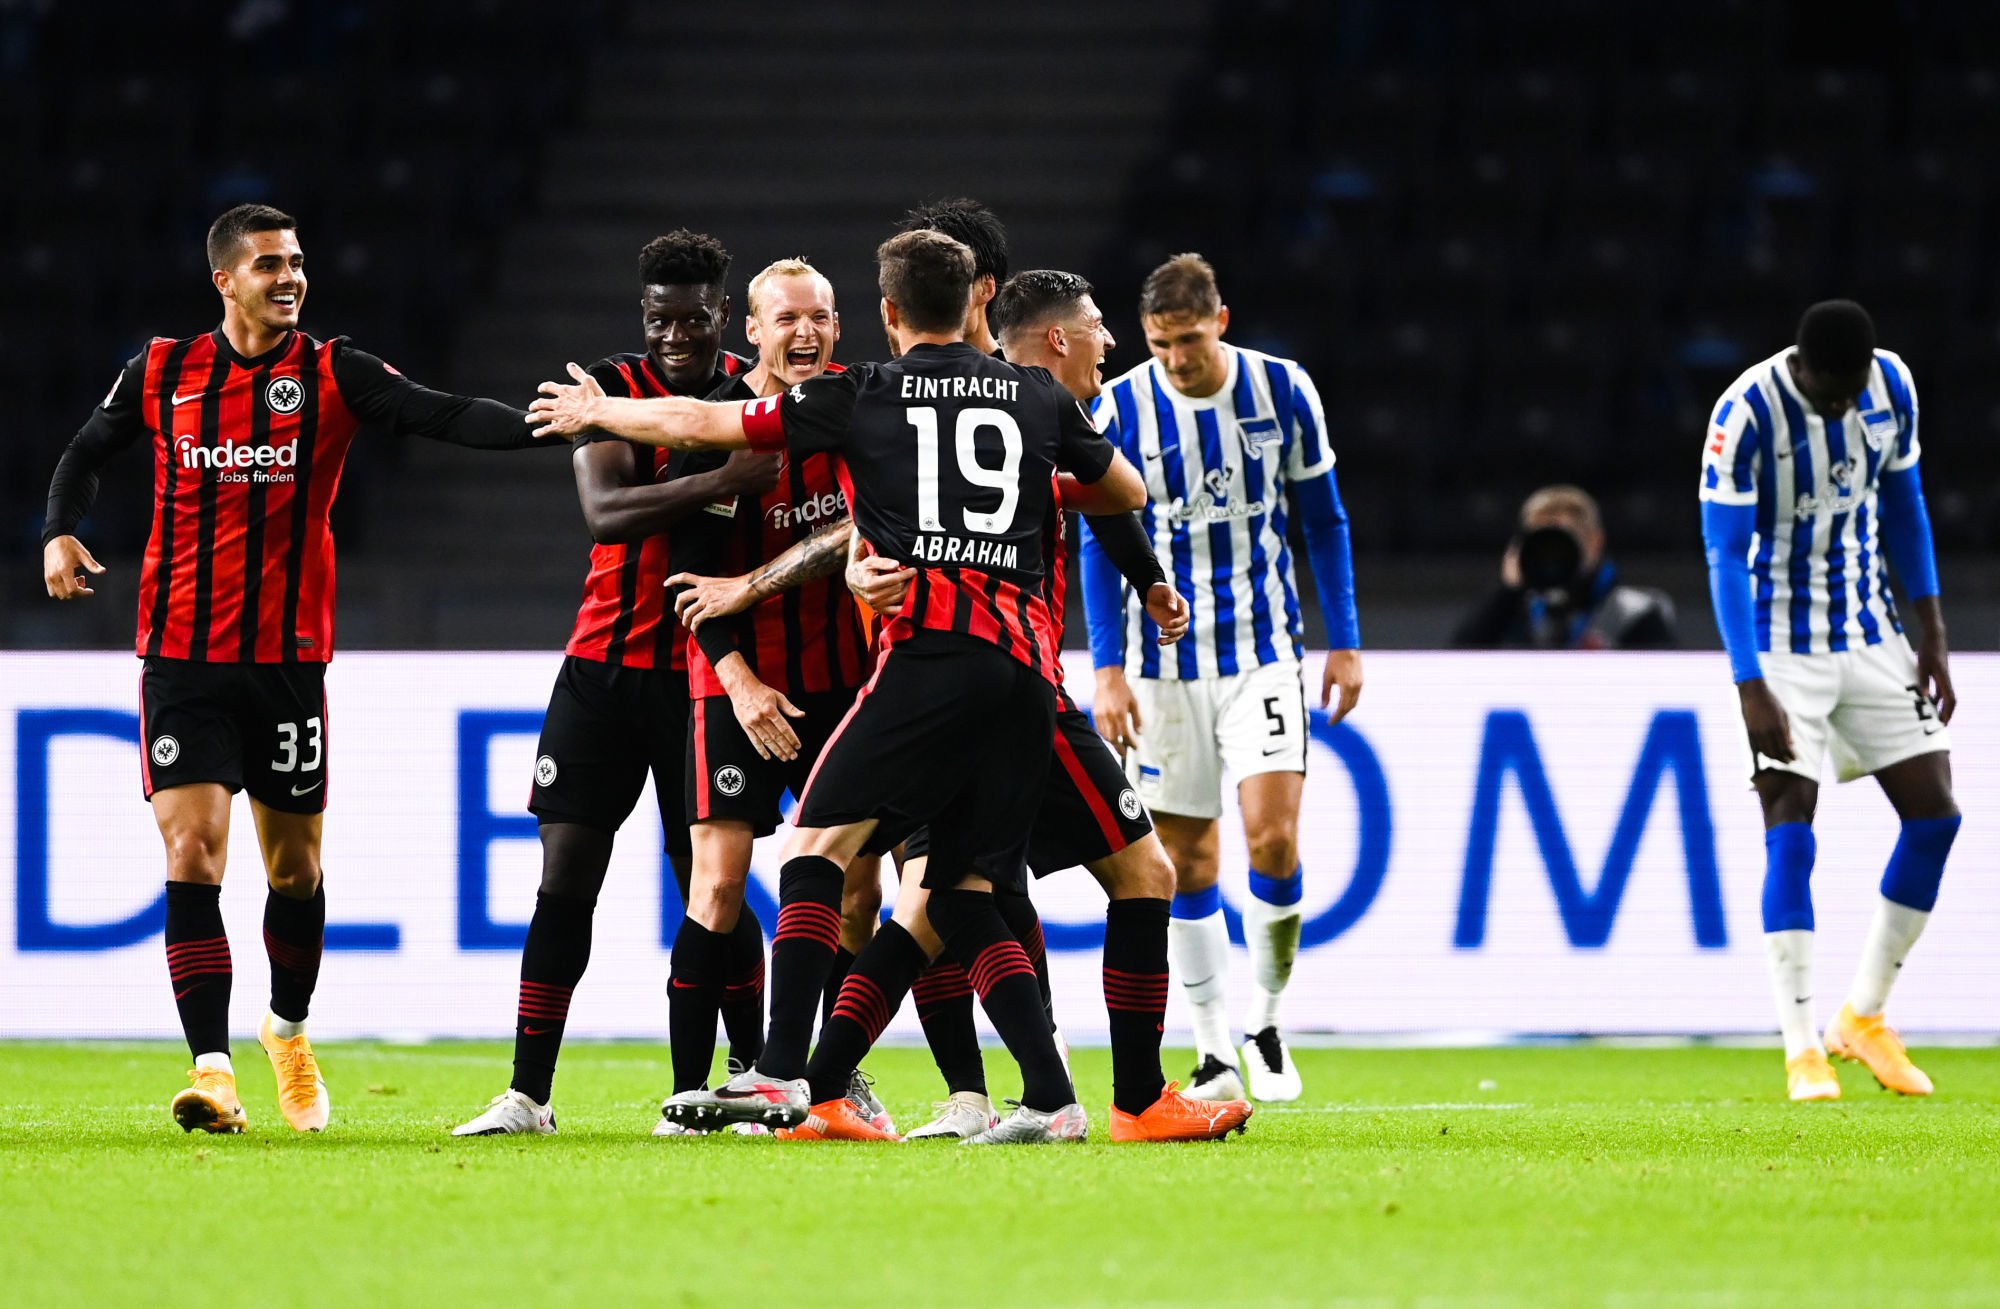 25 September 2020, Berlin: Football: Bundesliga, Hertha BSC - Eintracht Frankfurt, 2nd matchday in the Olympic Stadium. Frankfurt's players cheer the 3:0 by Sebastian Rode (M). On the right, Herthas Niklas Stark and Jordan Torunarigha (r) with their heads lowered. Photo: Soeren Stache/dpa-Zentralbild/dpa - IMPORTANT NOTE: In accordance with the regulations of the DFL Deutsche Fußball Liga and the DFB Deutscher Fußball-Bund, it is prohibited to exploit or have exploited in the stadium and/or from the game taken photographs in the form of sequence images and/or video-like photo series. | usage worldwide 
Photo by Icon Sport - Olympiastadion - Berlin (Allemagne)